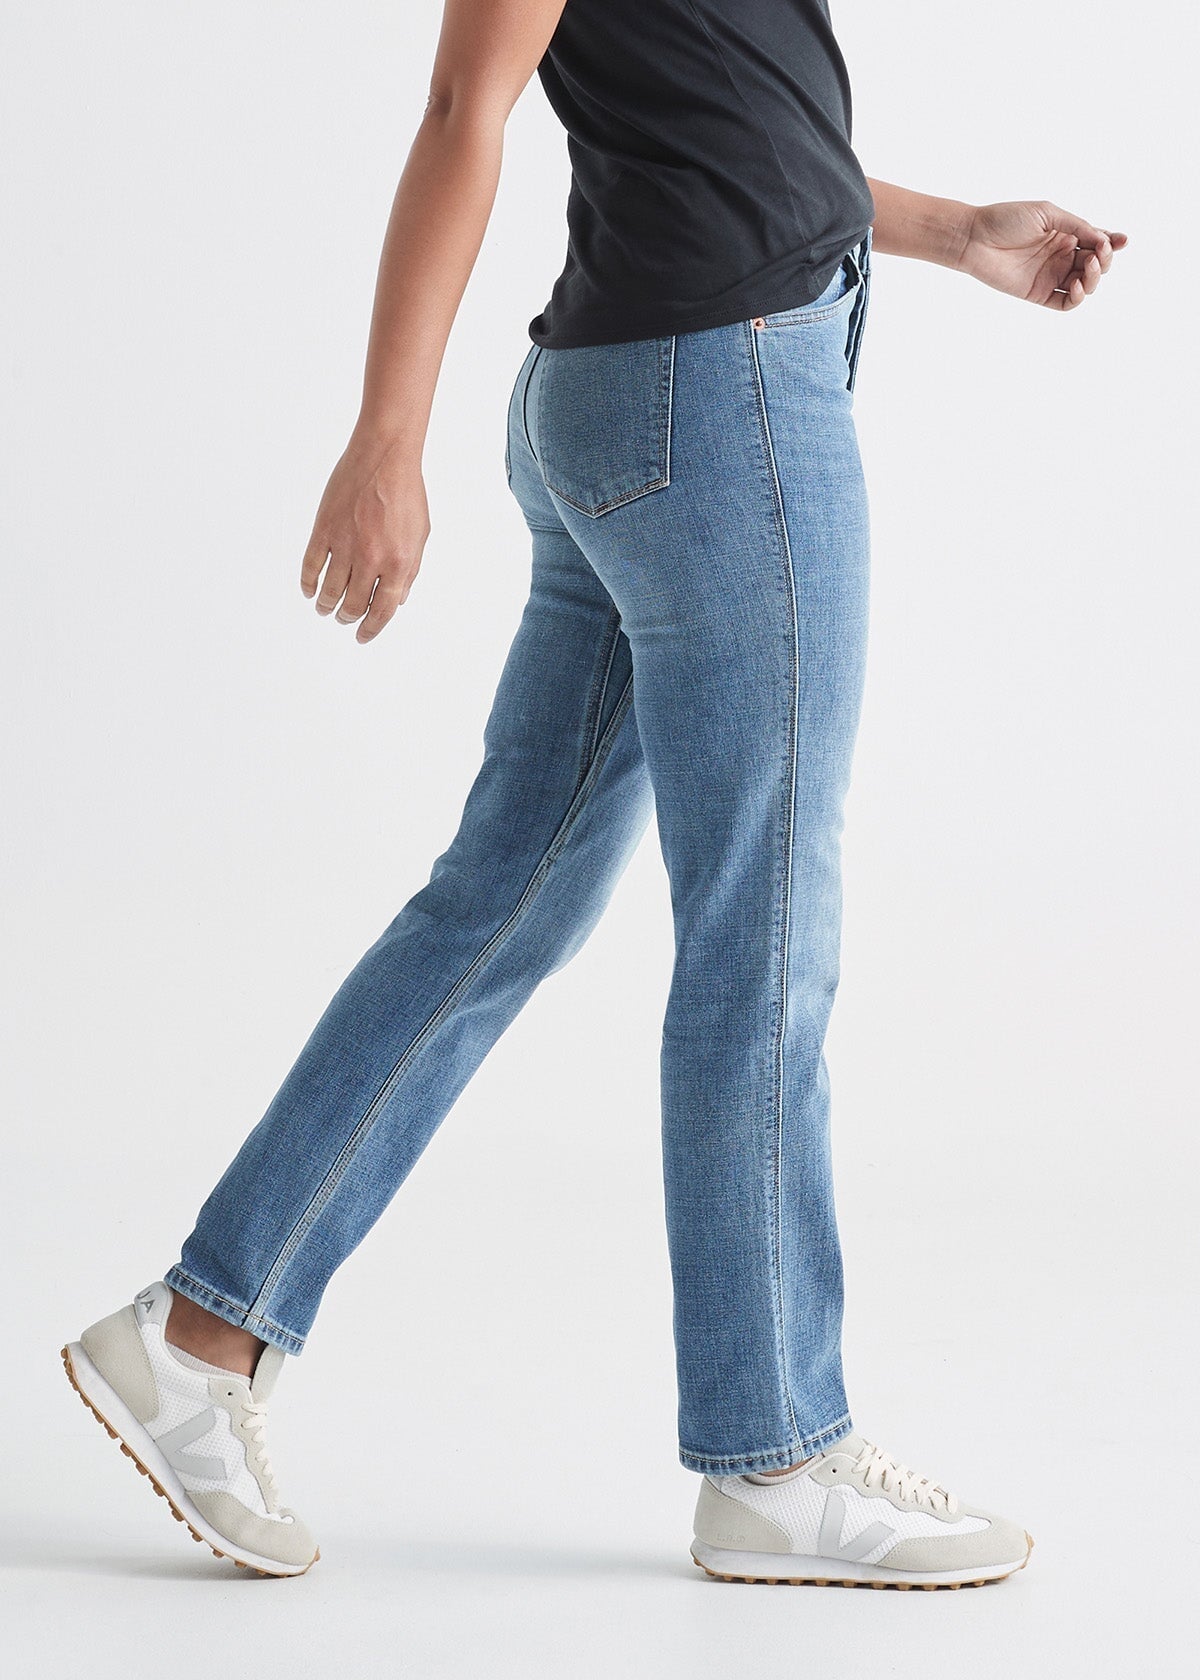 Women's Vintage Blue High Rise Straight Stretch Jeans